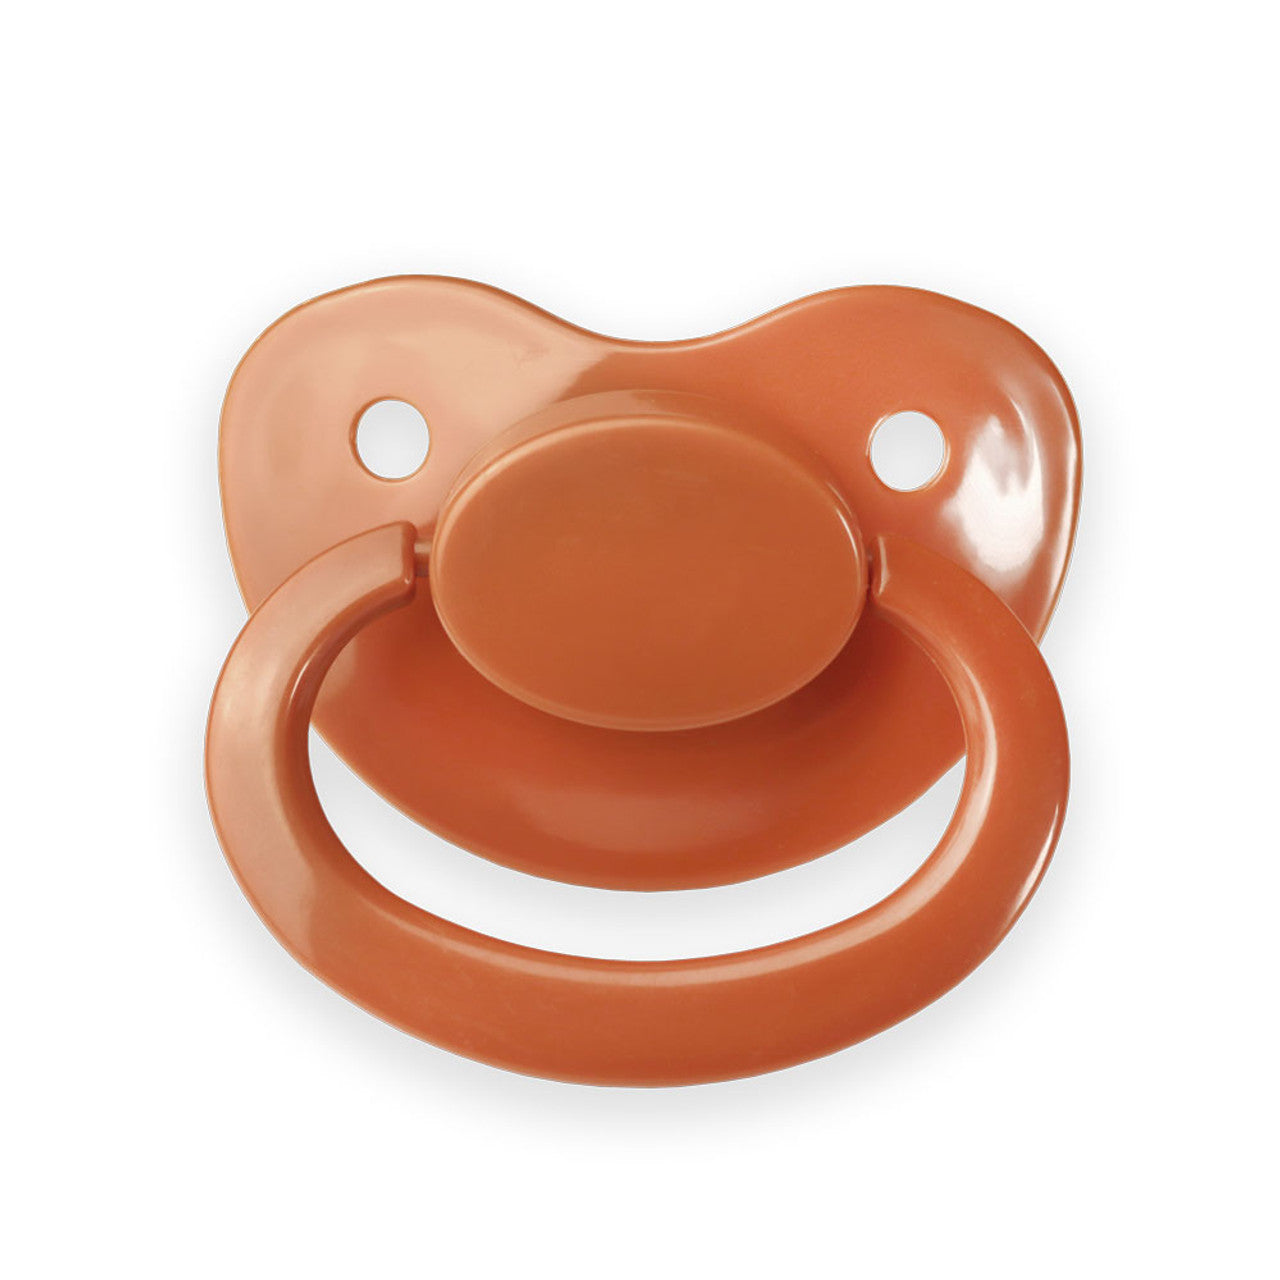 Adult Size 6 Pacifier coffee